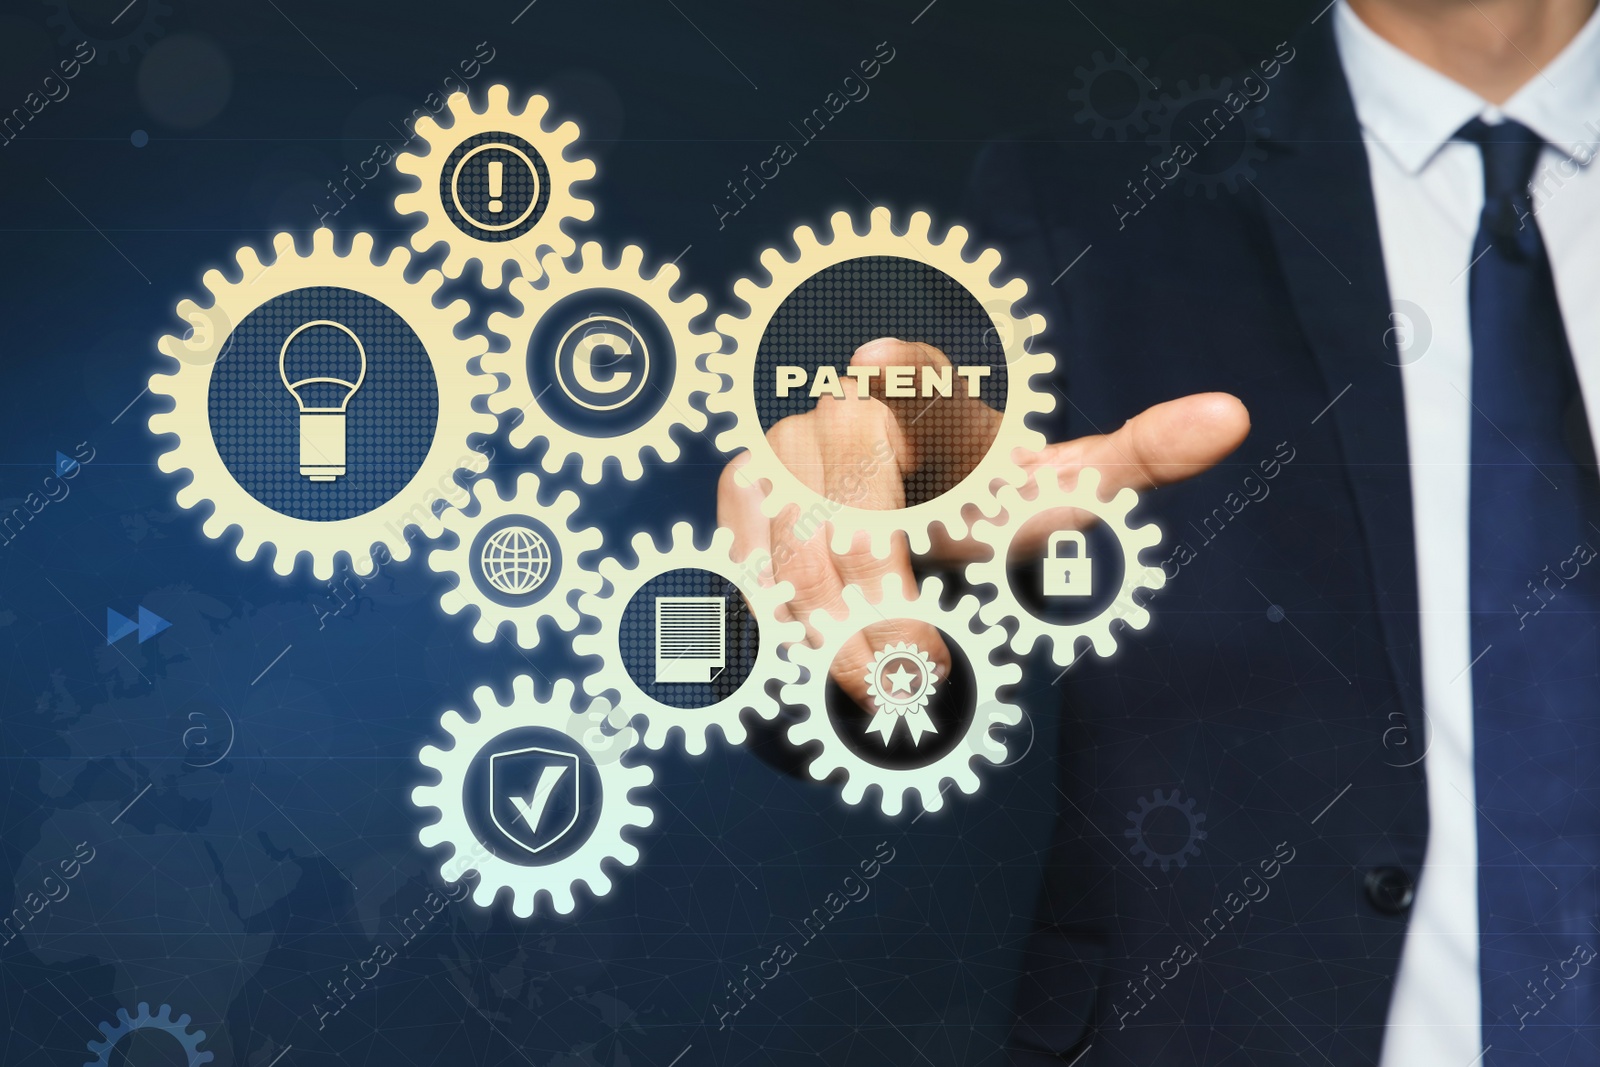 Image of Patent concept. Different virtual icons and man on color background, closeup